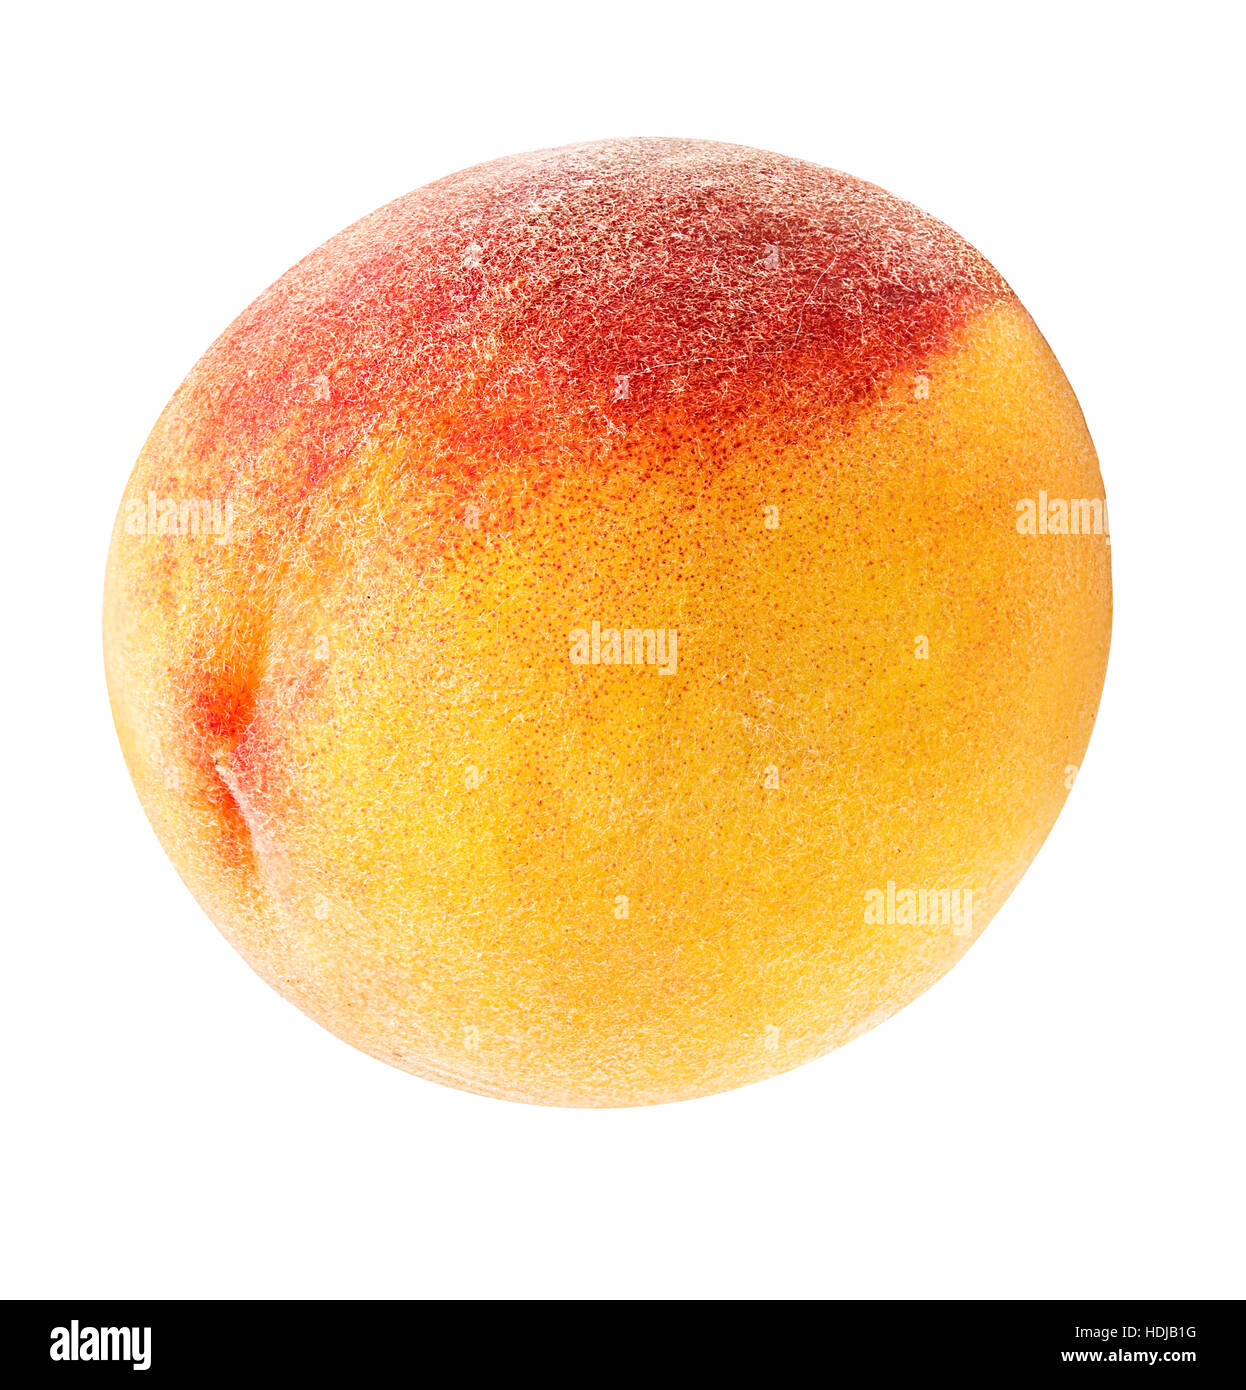 Peach isolated on white background Stock Photo